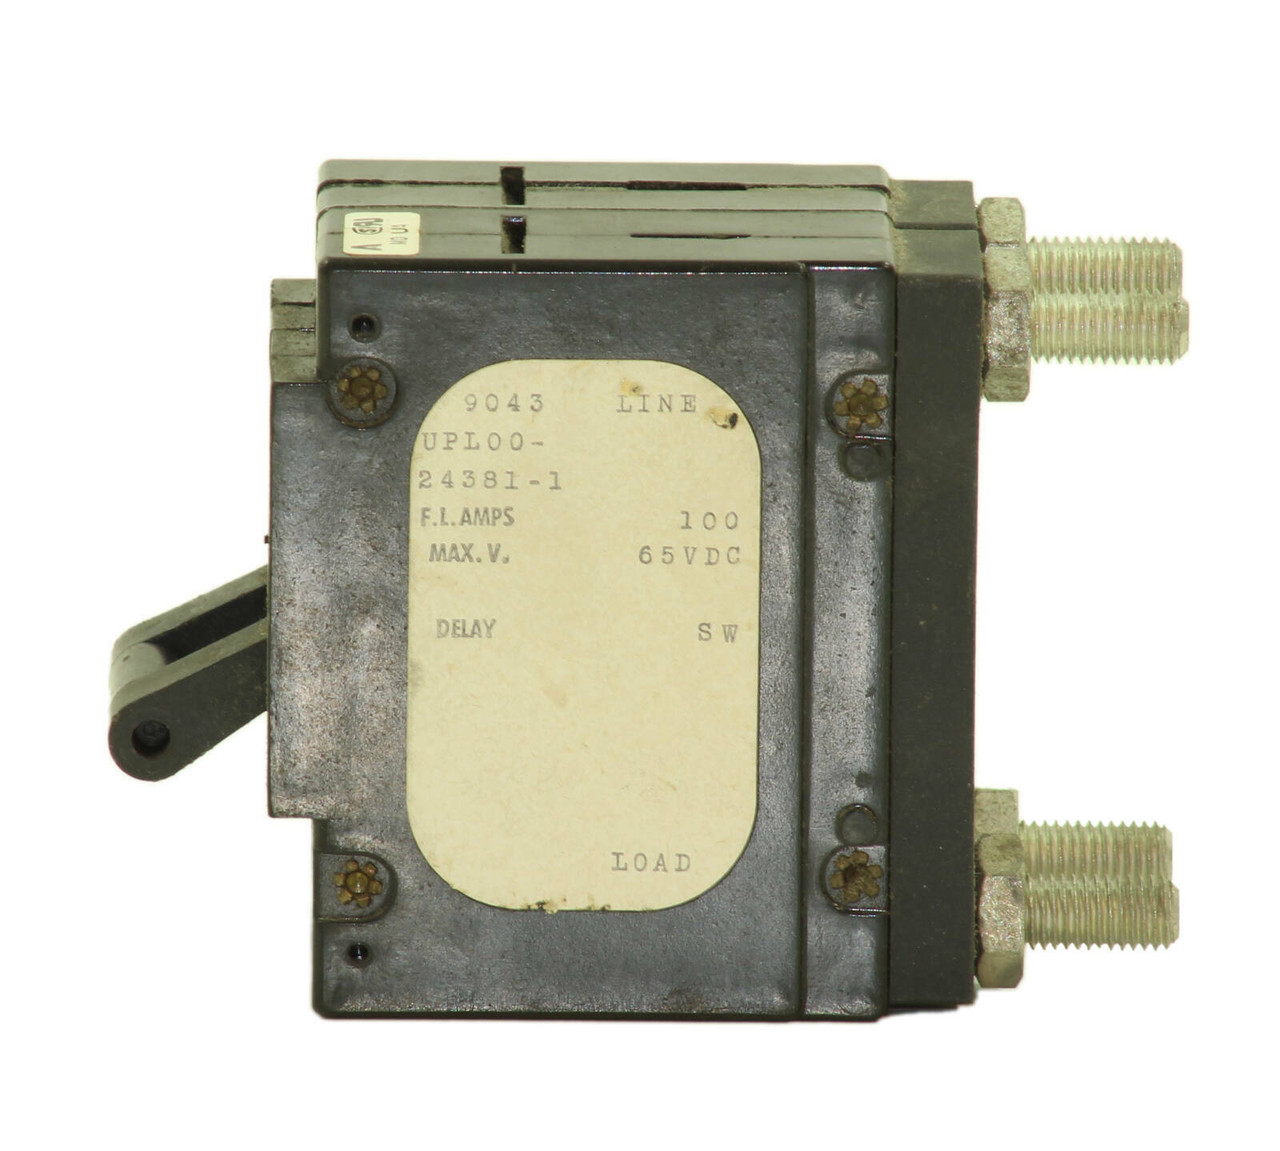 Airpax UPL00-24381-1 Breaker 100A 65V Double Pole